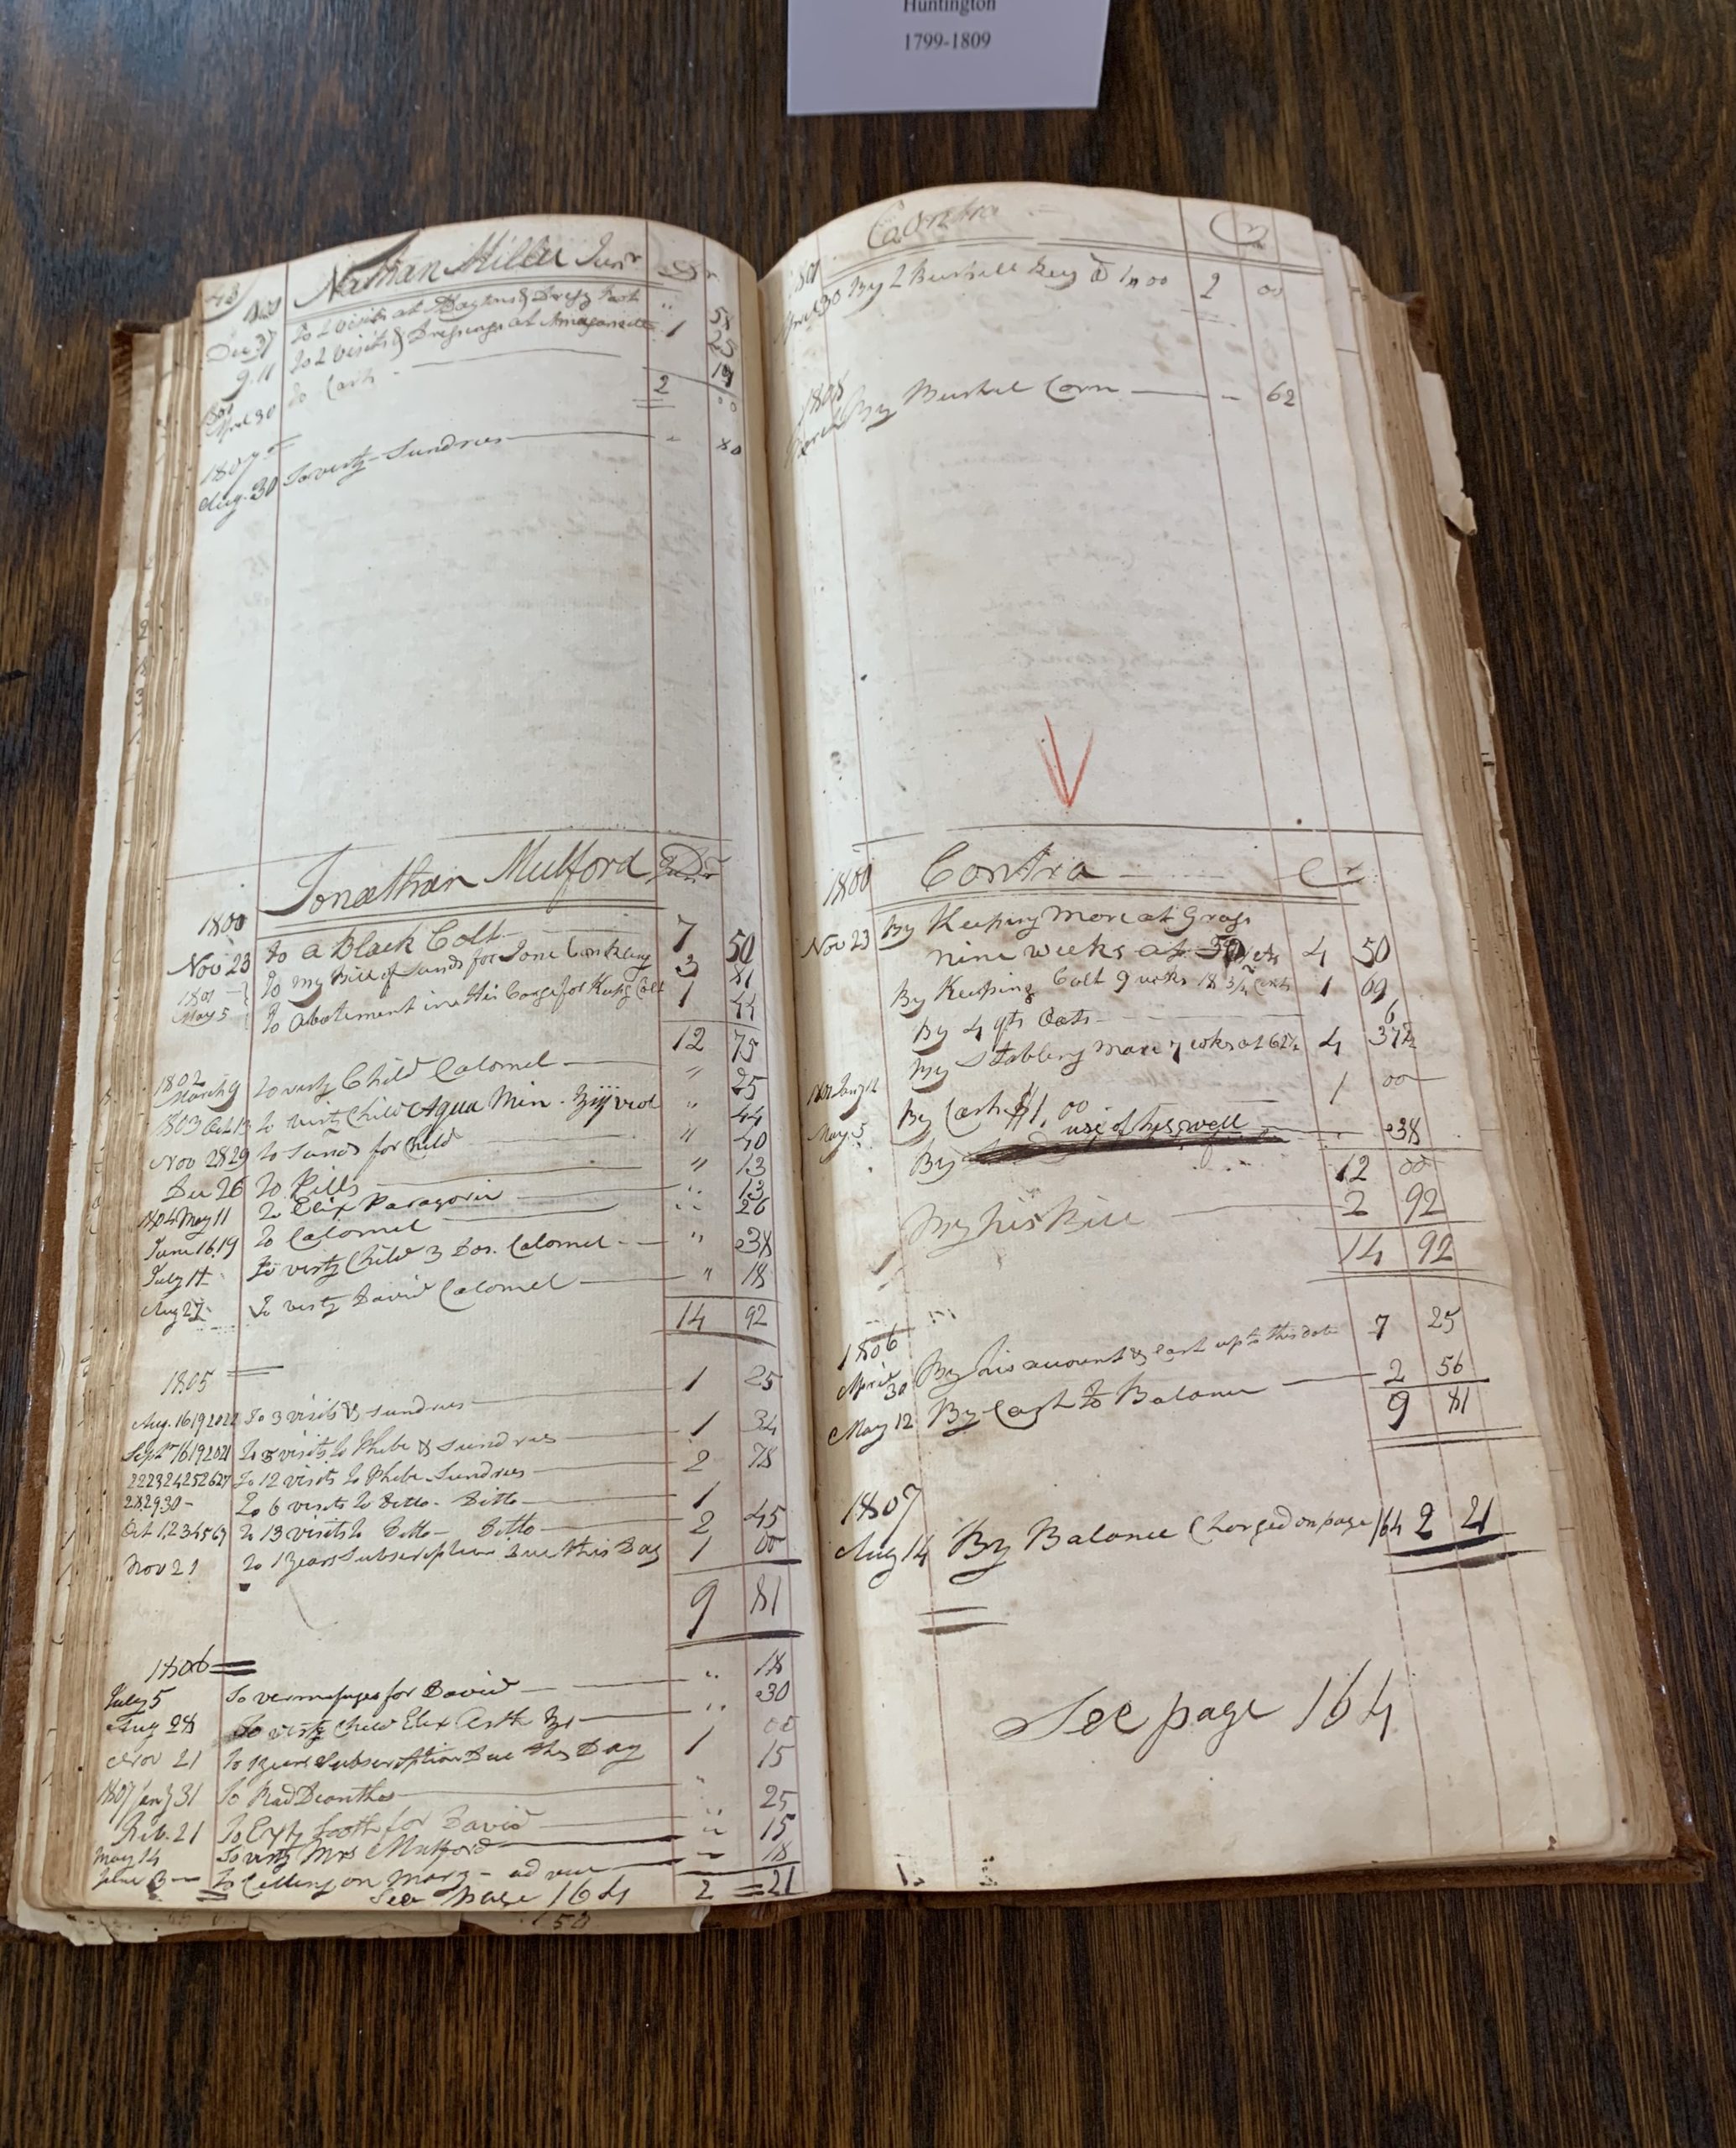 Abel Huntington day and account book.